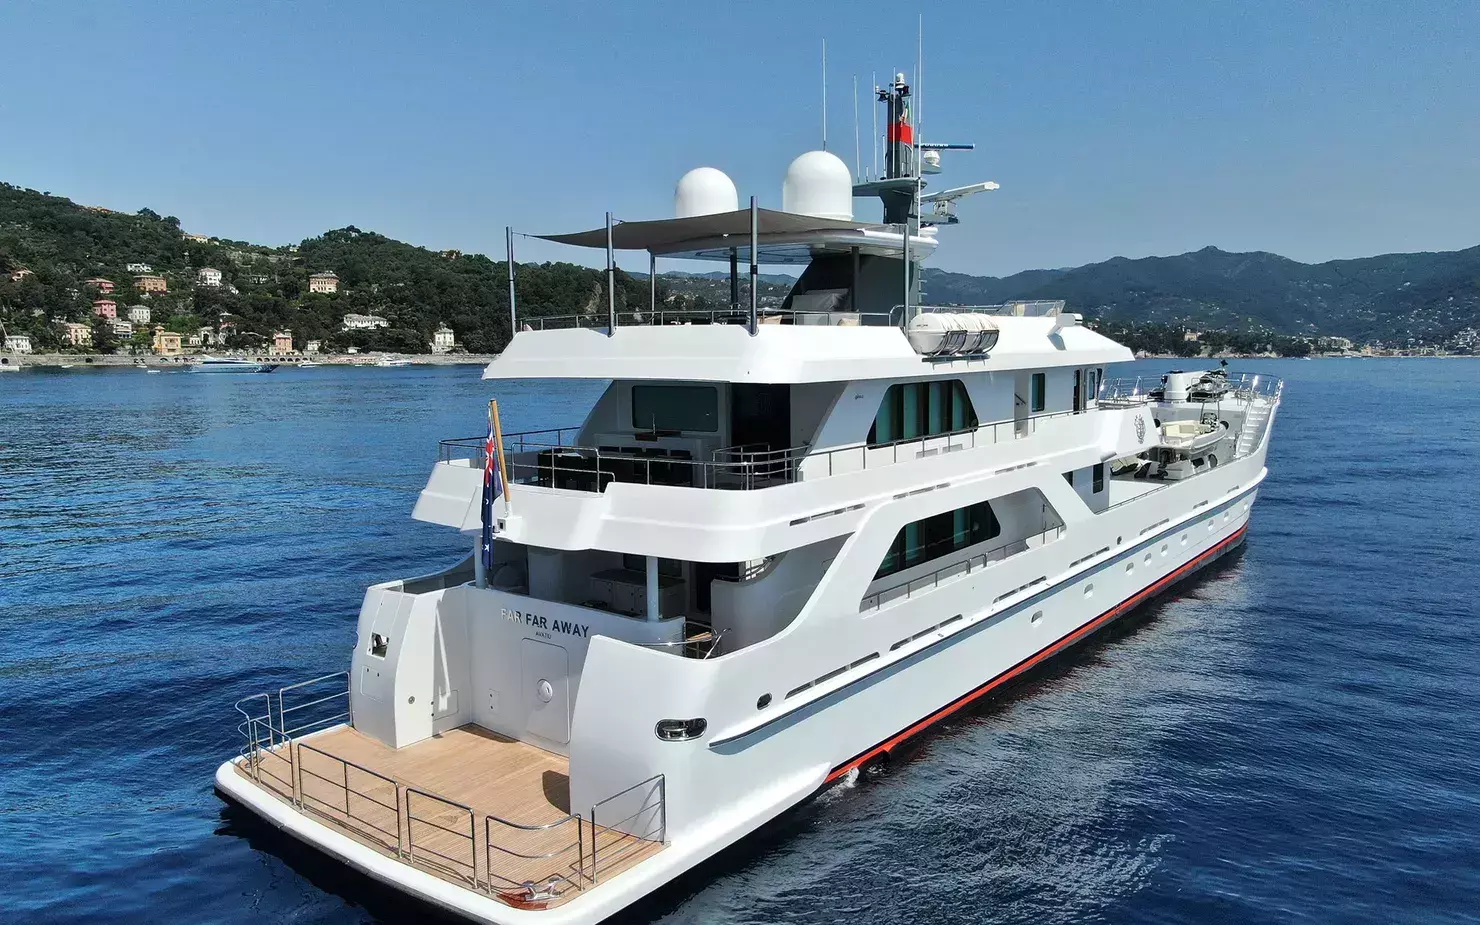 Far Far Away by Inace Yachts - Top rates for a Charter of a private Superyacht in Italy